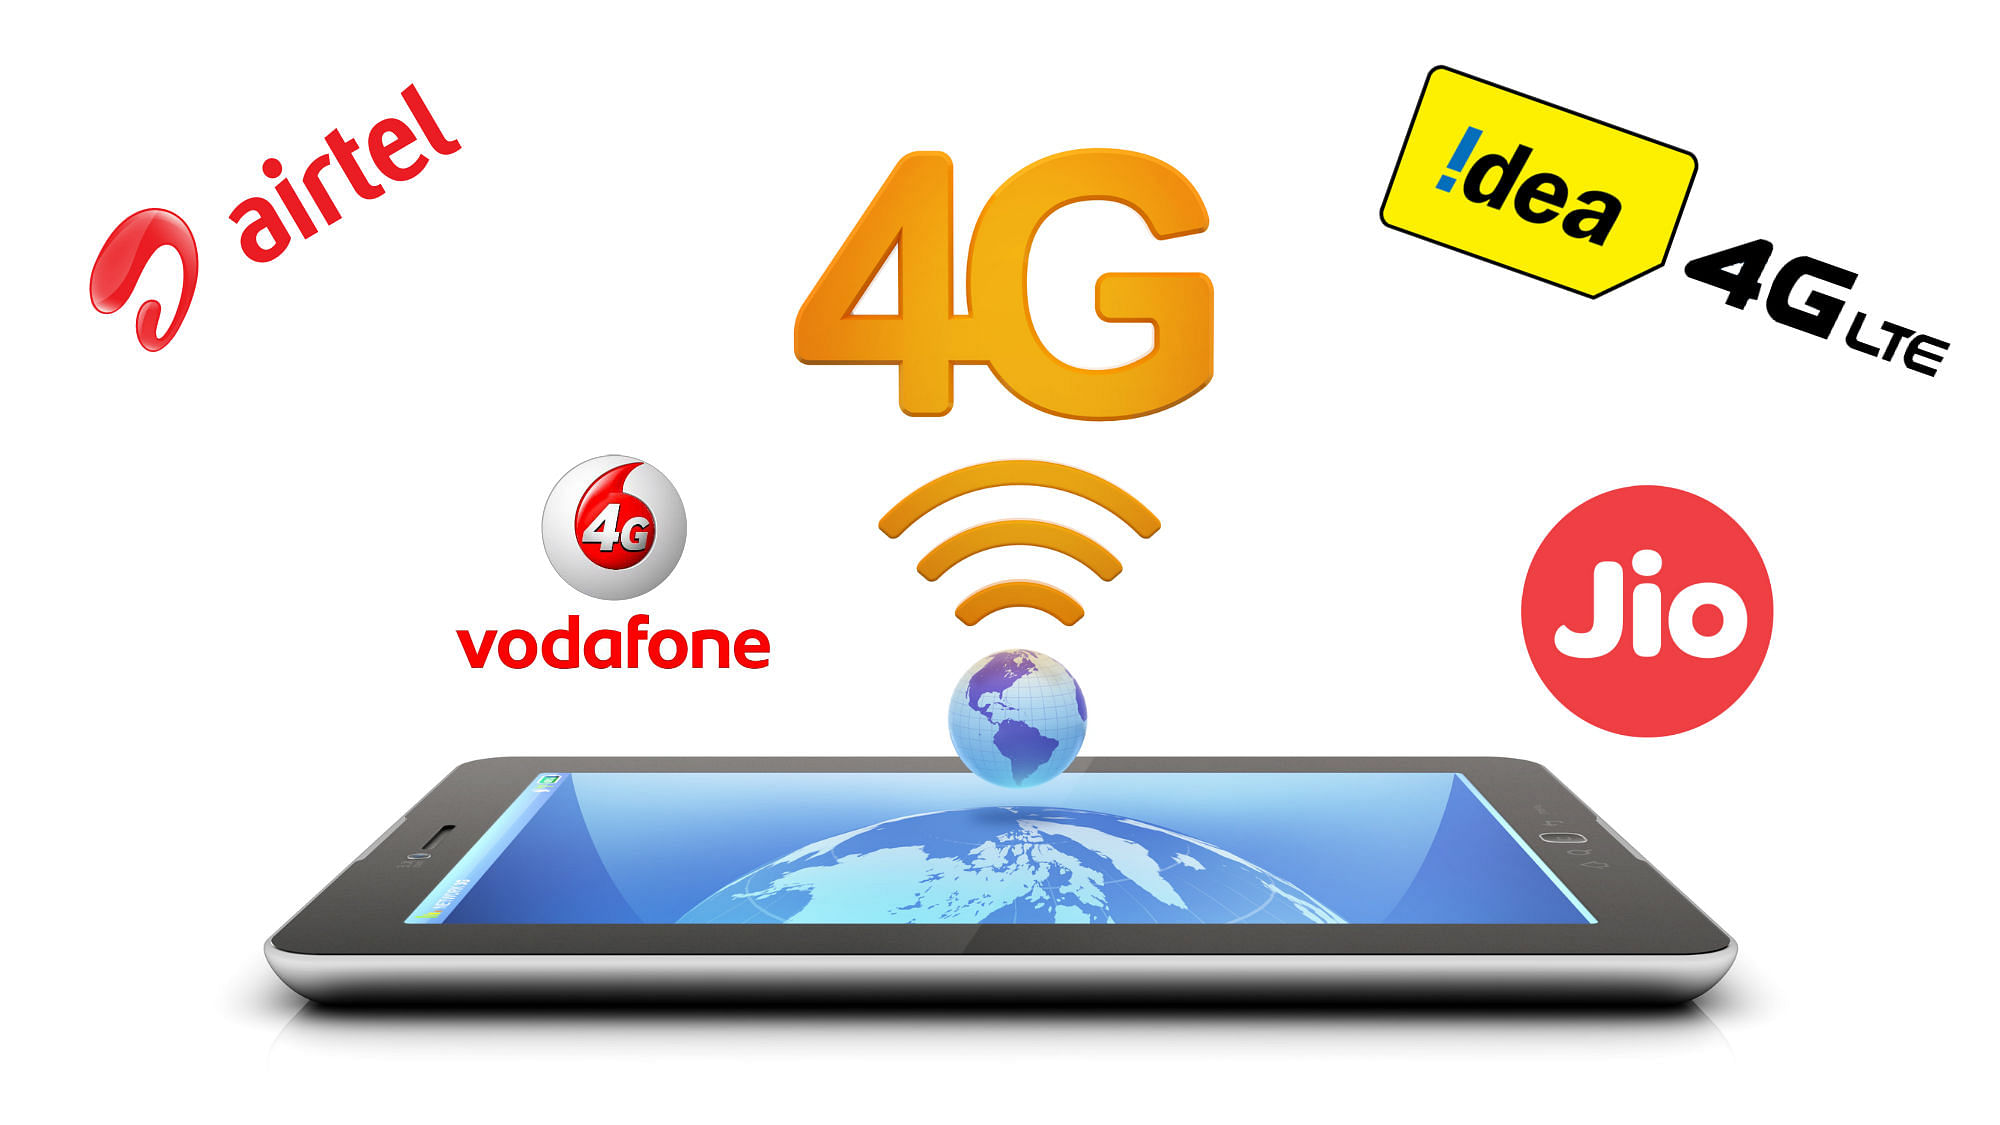 Telecom companies are biding for 4G bands in the spectrum auction. (Photo: <b>The Quint</b>)